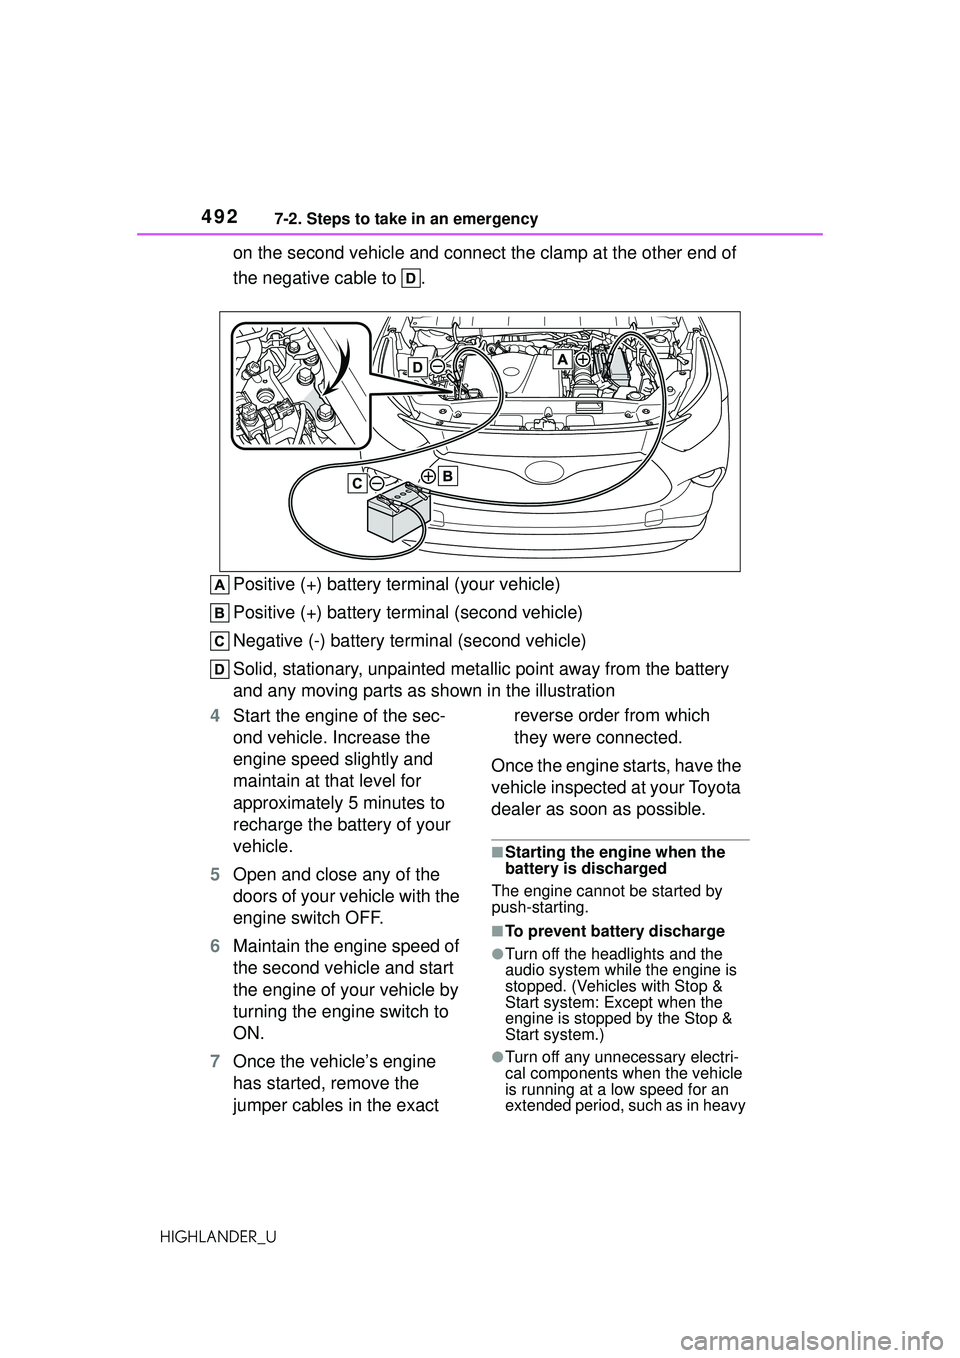 TOYOTA HIGHLANDER 2021  Owners Manual (in English) 4927-2. Steps to take in an emergency
HIGHLANDER_U
on the second vehicle and connect the clamp at the other end of 
the negative cable to  .
Positive (+) battery terminal (your vehicle)
Positive (+) b